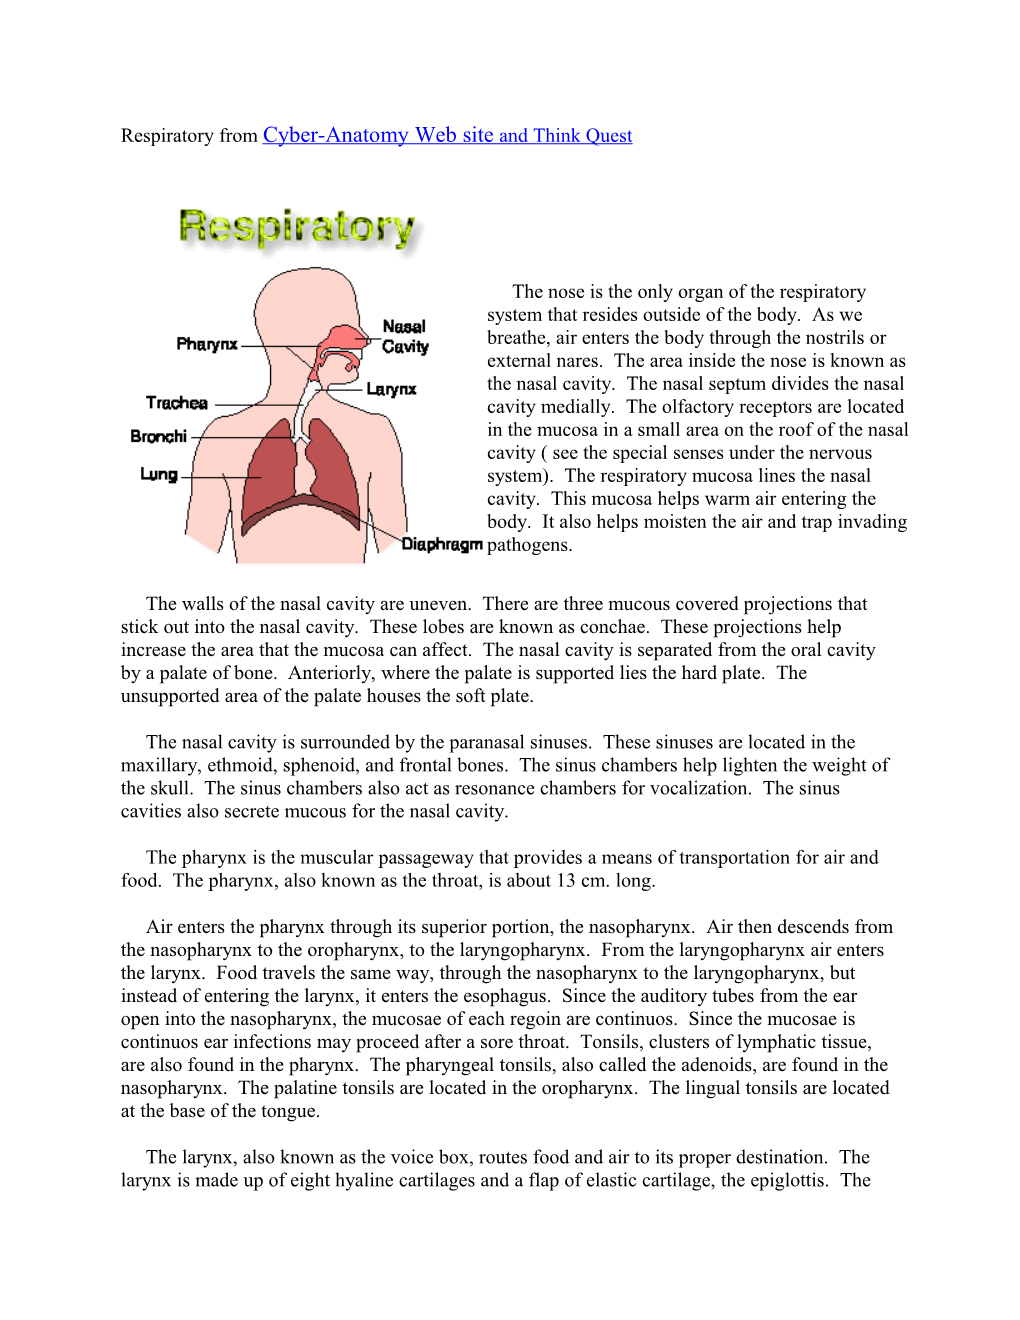 Respiratory from Cyber-Anatomy Web Site and Think Quest